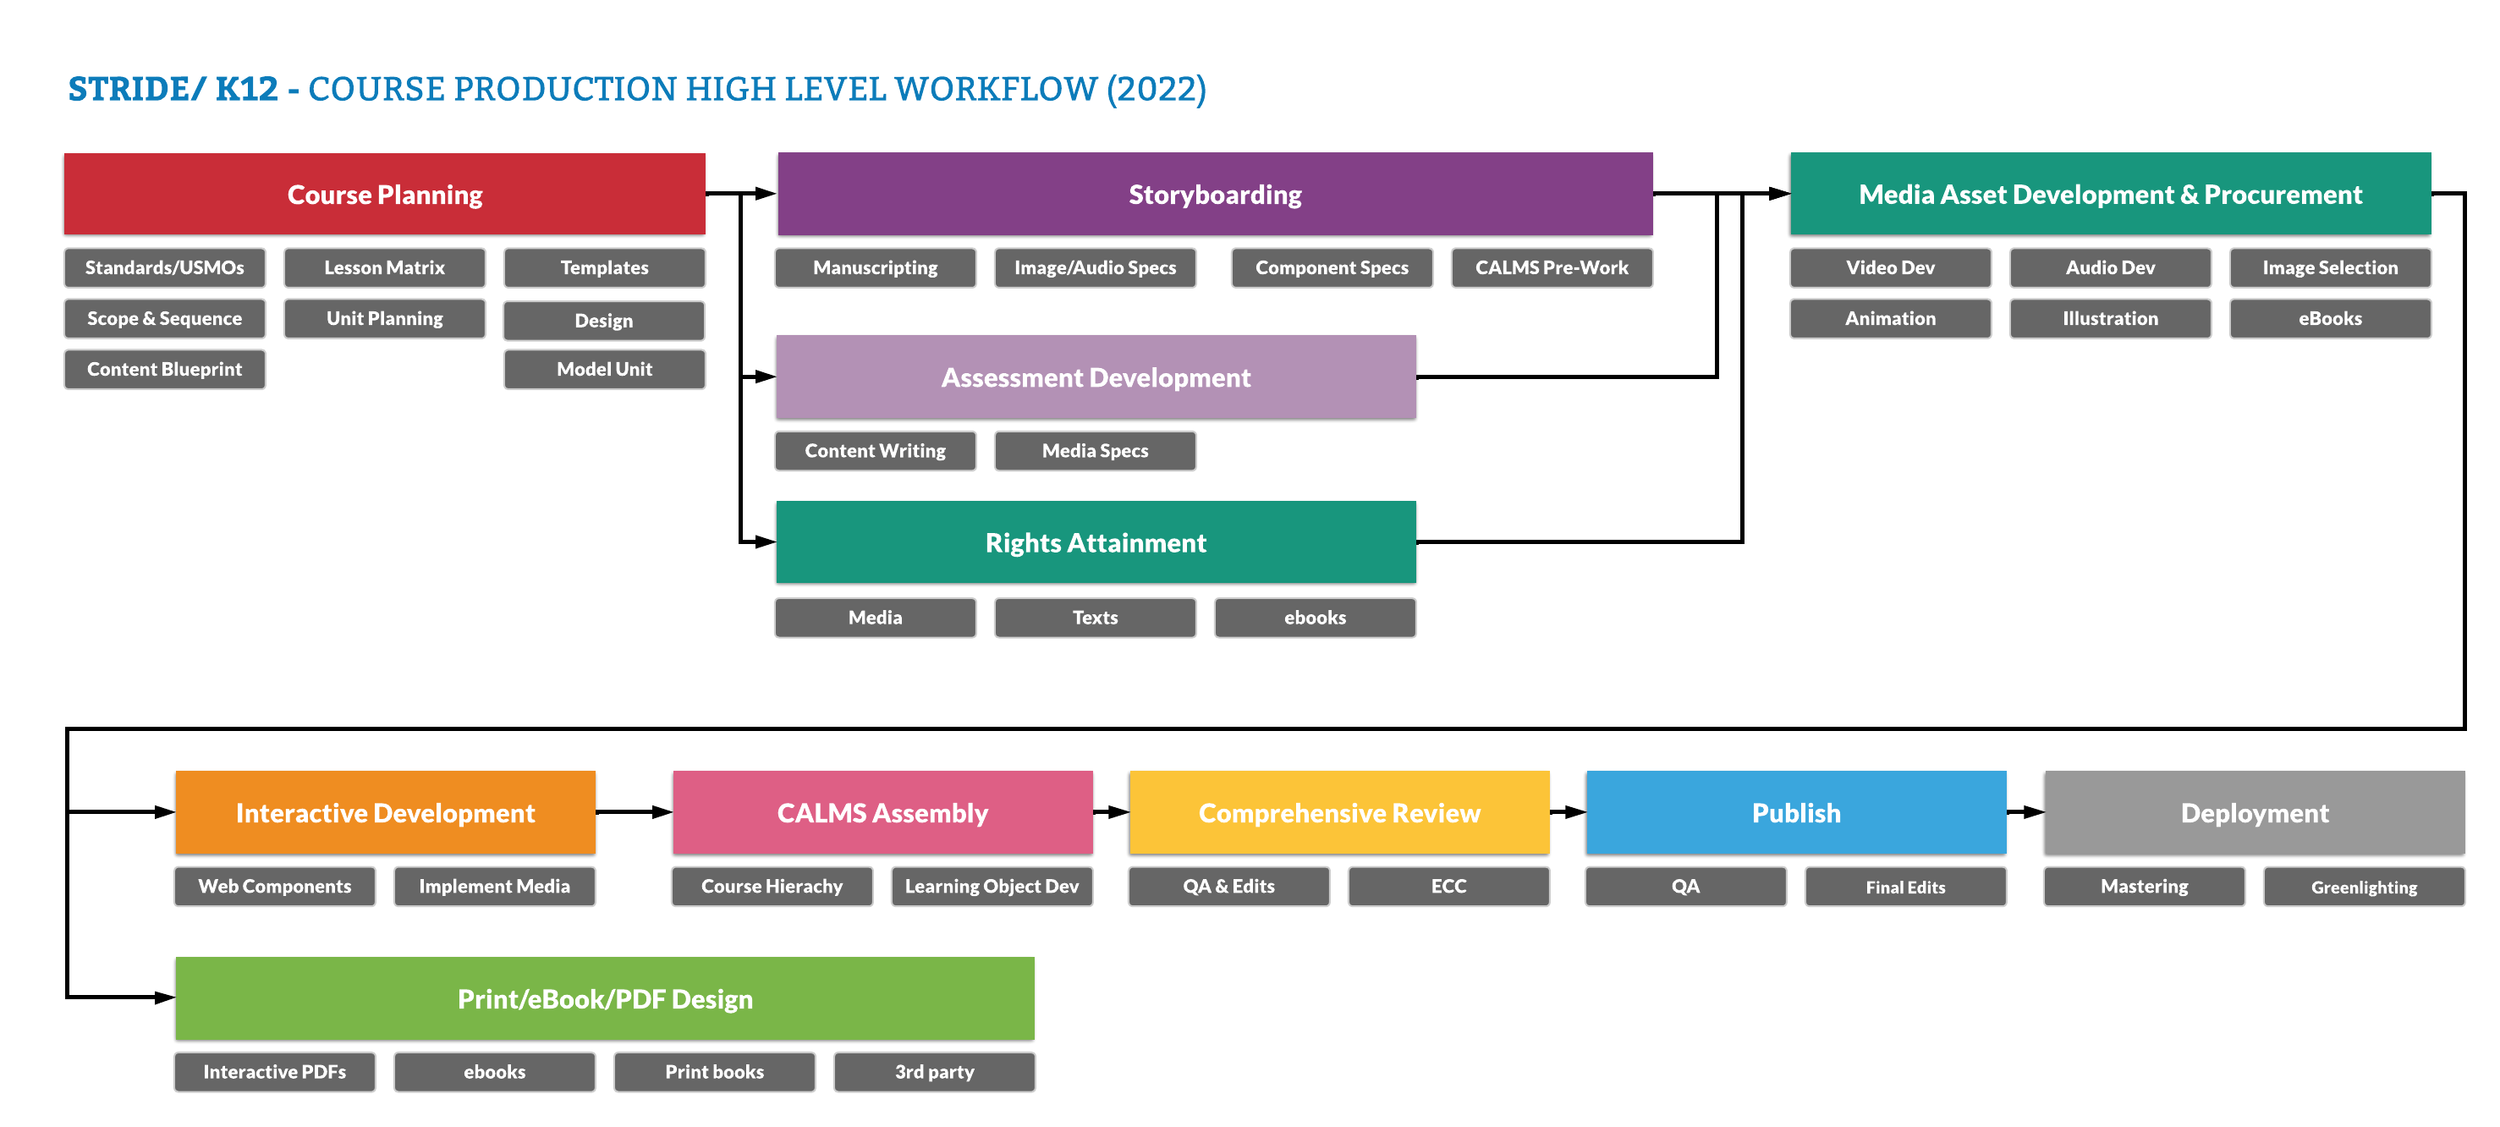 _K12 - Course Production High Level Workflow - 2022 HIGH LEVEL WORKFLOW (1).png